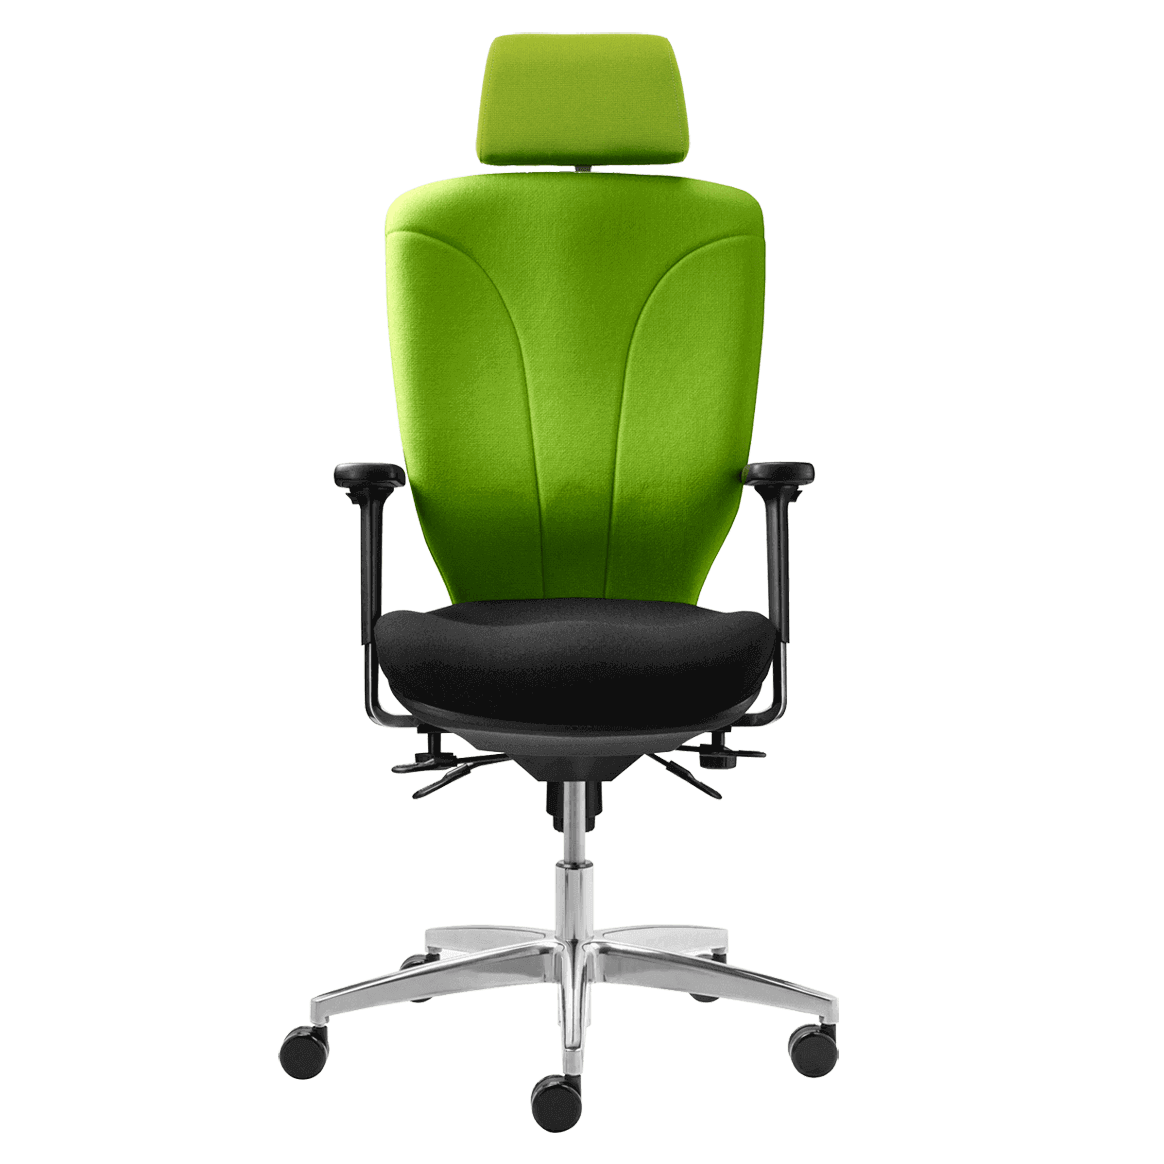 Back Friendly Office Chairs Directly From The Manufacturer In Switzerland Tergon